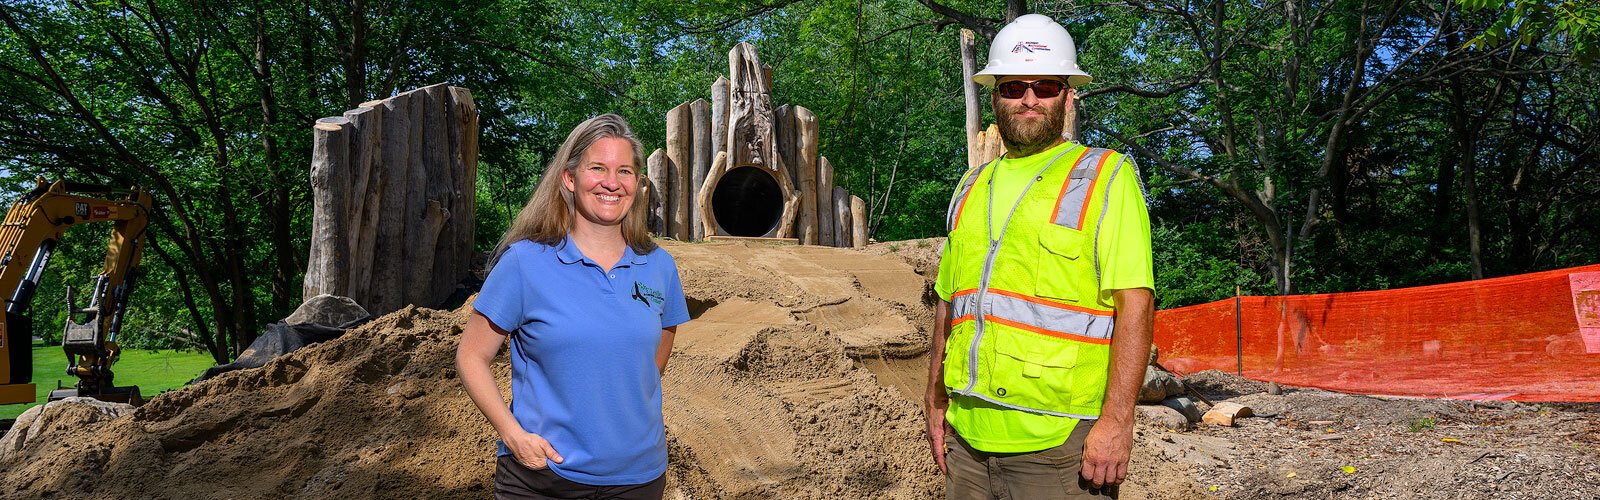 LSNC executive director Susan Westhoff and Michigan Recreational Construction's Mark Carscadden by the Nature Playscape.